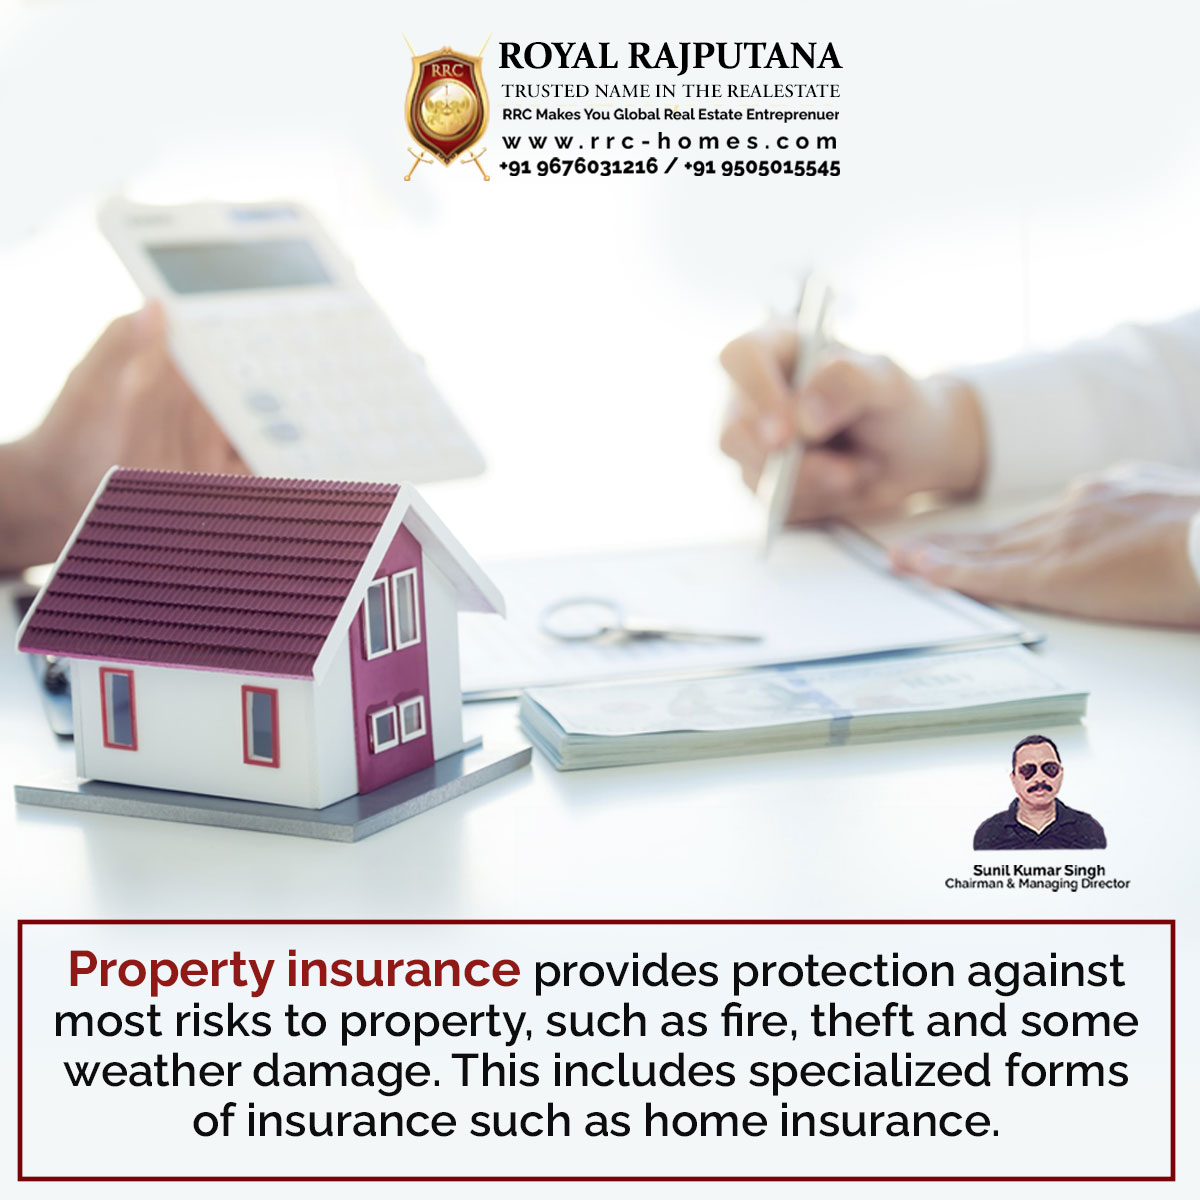 Property insurance provides protection against most risks to property, such as fire, theft and some weather damage. This includes specialized forms of insurance such as home insurance.

#royalrajputana  #rrc #properties #aboutrrc #propertyinsurance #risks #fire #home #damage